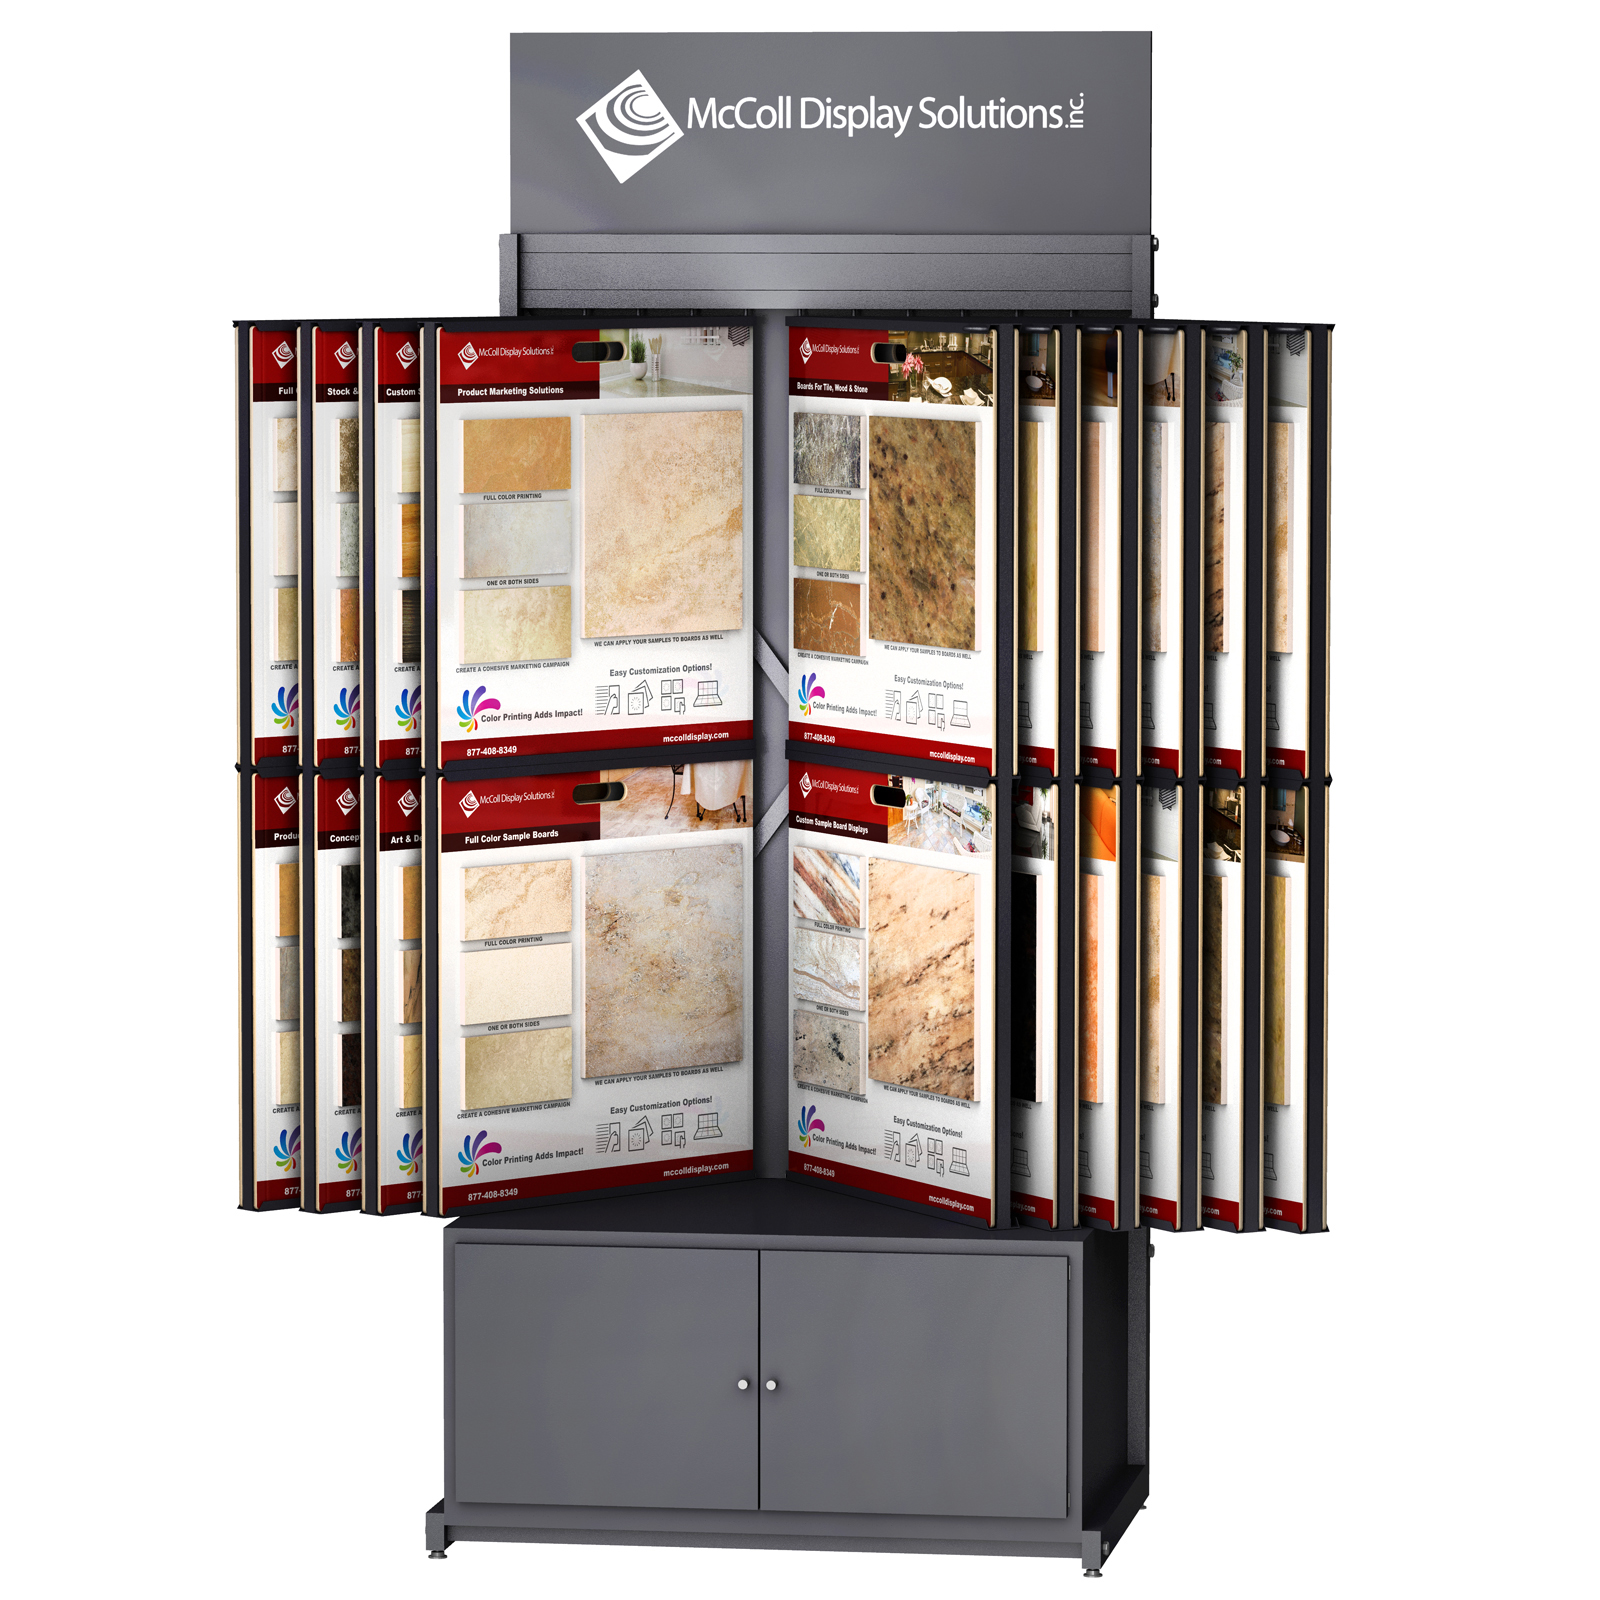 CD32 Wing Rack Tower Sample Boards Storage Drawer Tile Stone Marble Wood Channel System Showroom Displays McColl Display